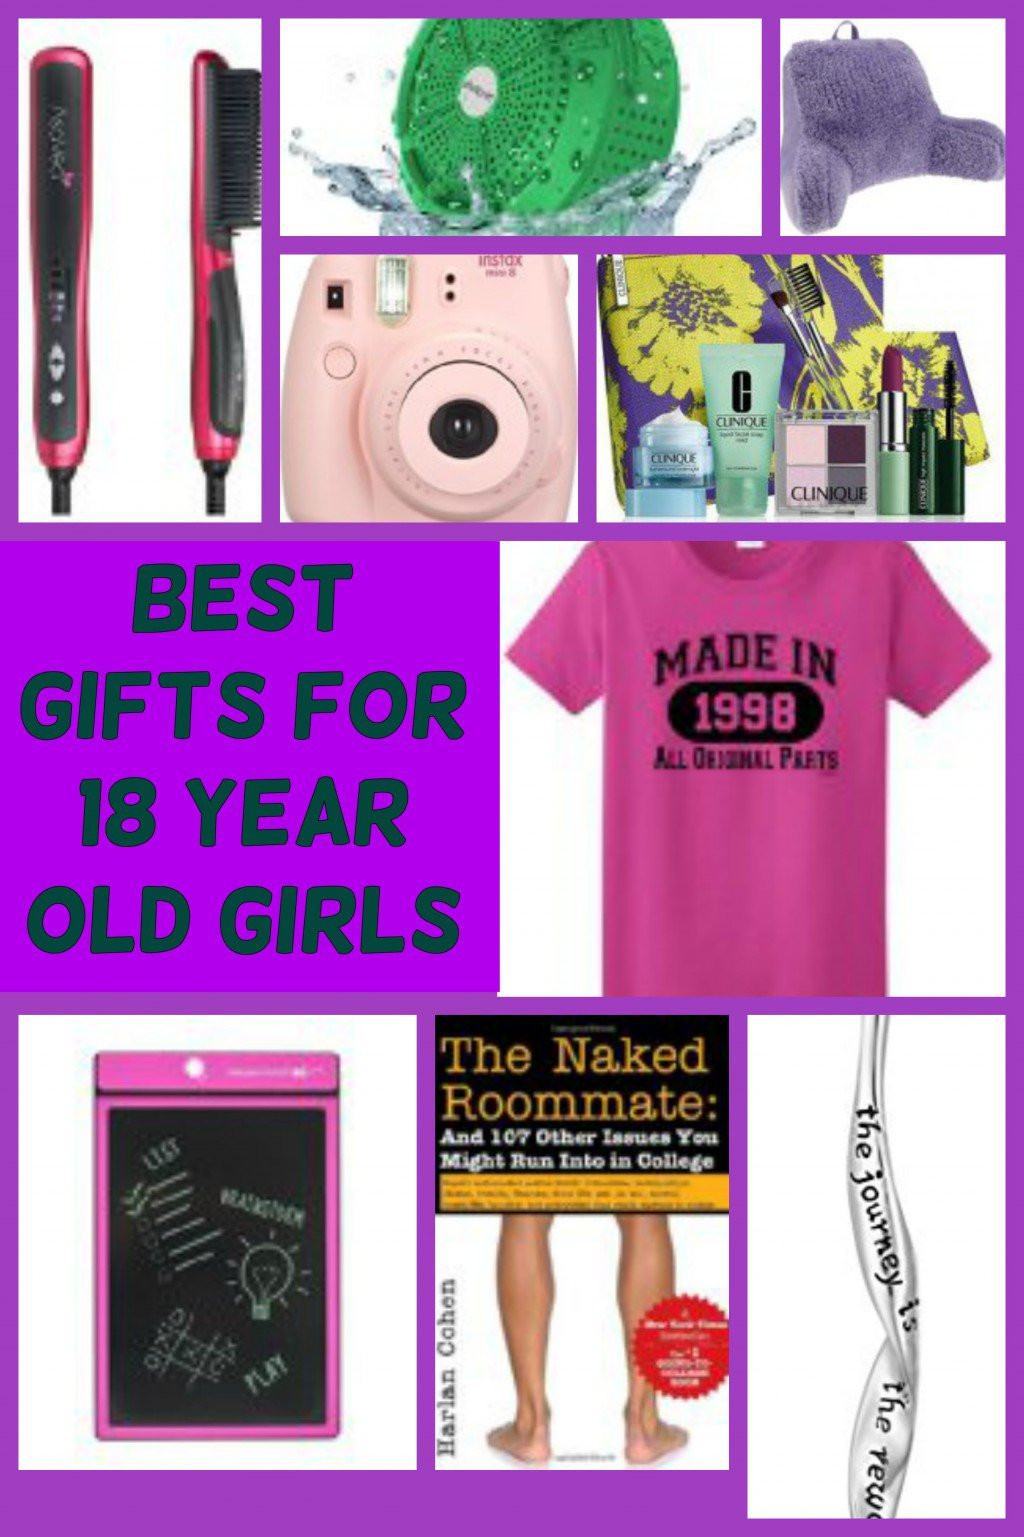 Best ideas about Gift Ideas For 18 Year Old
. Save or Pin Popular Birthday and Christmas Gift Ideas for 18 Year Old Now.